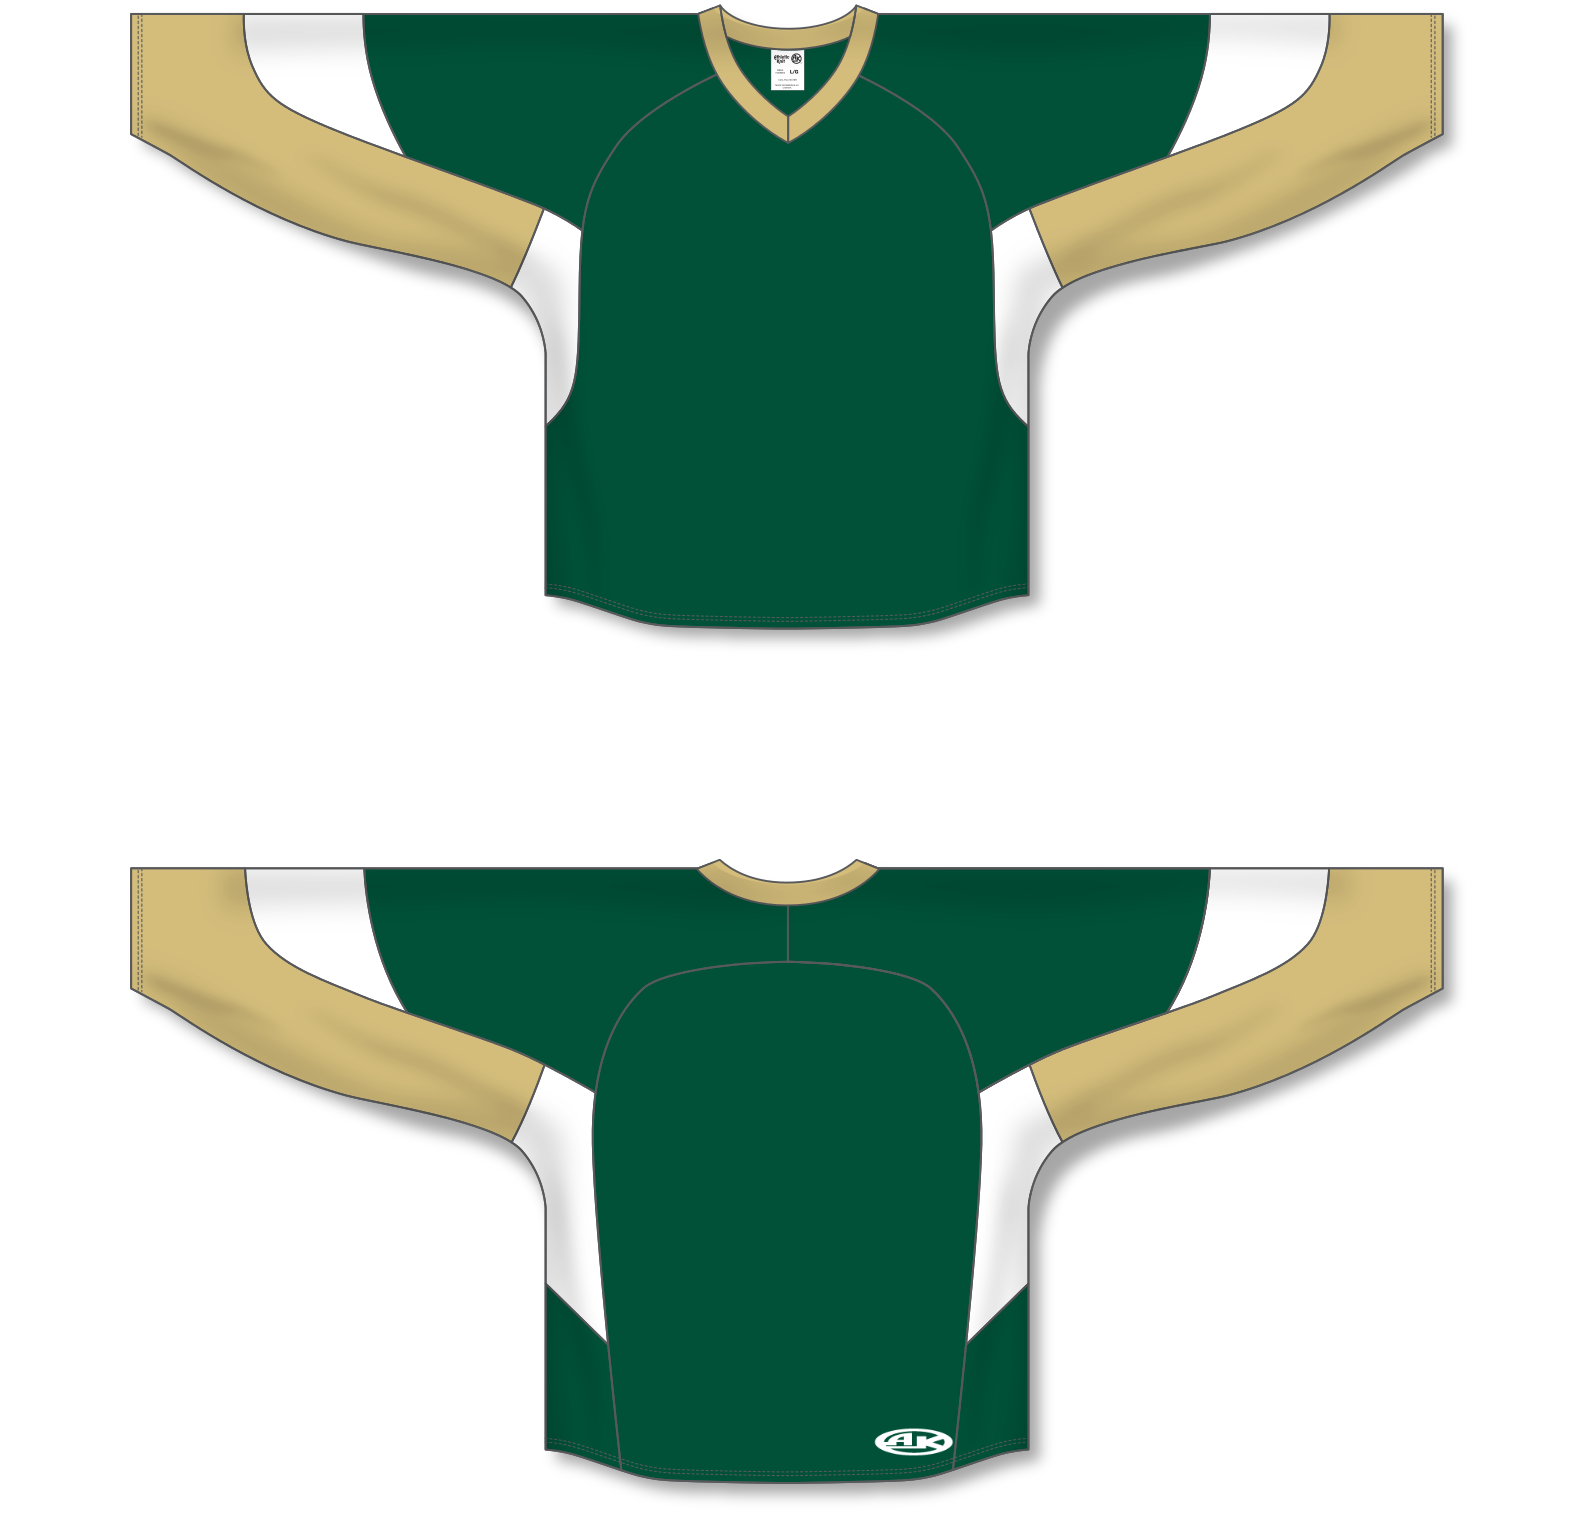 Youth London Knights Jersey - Green